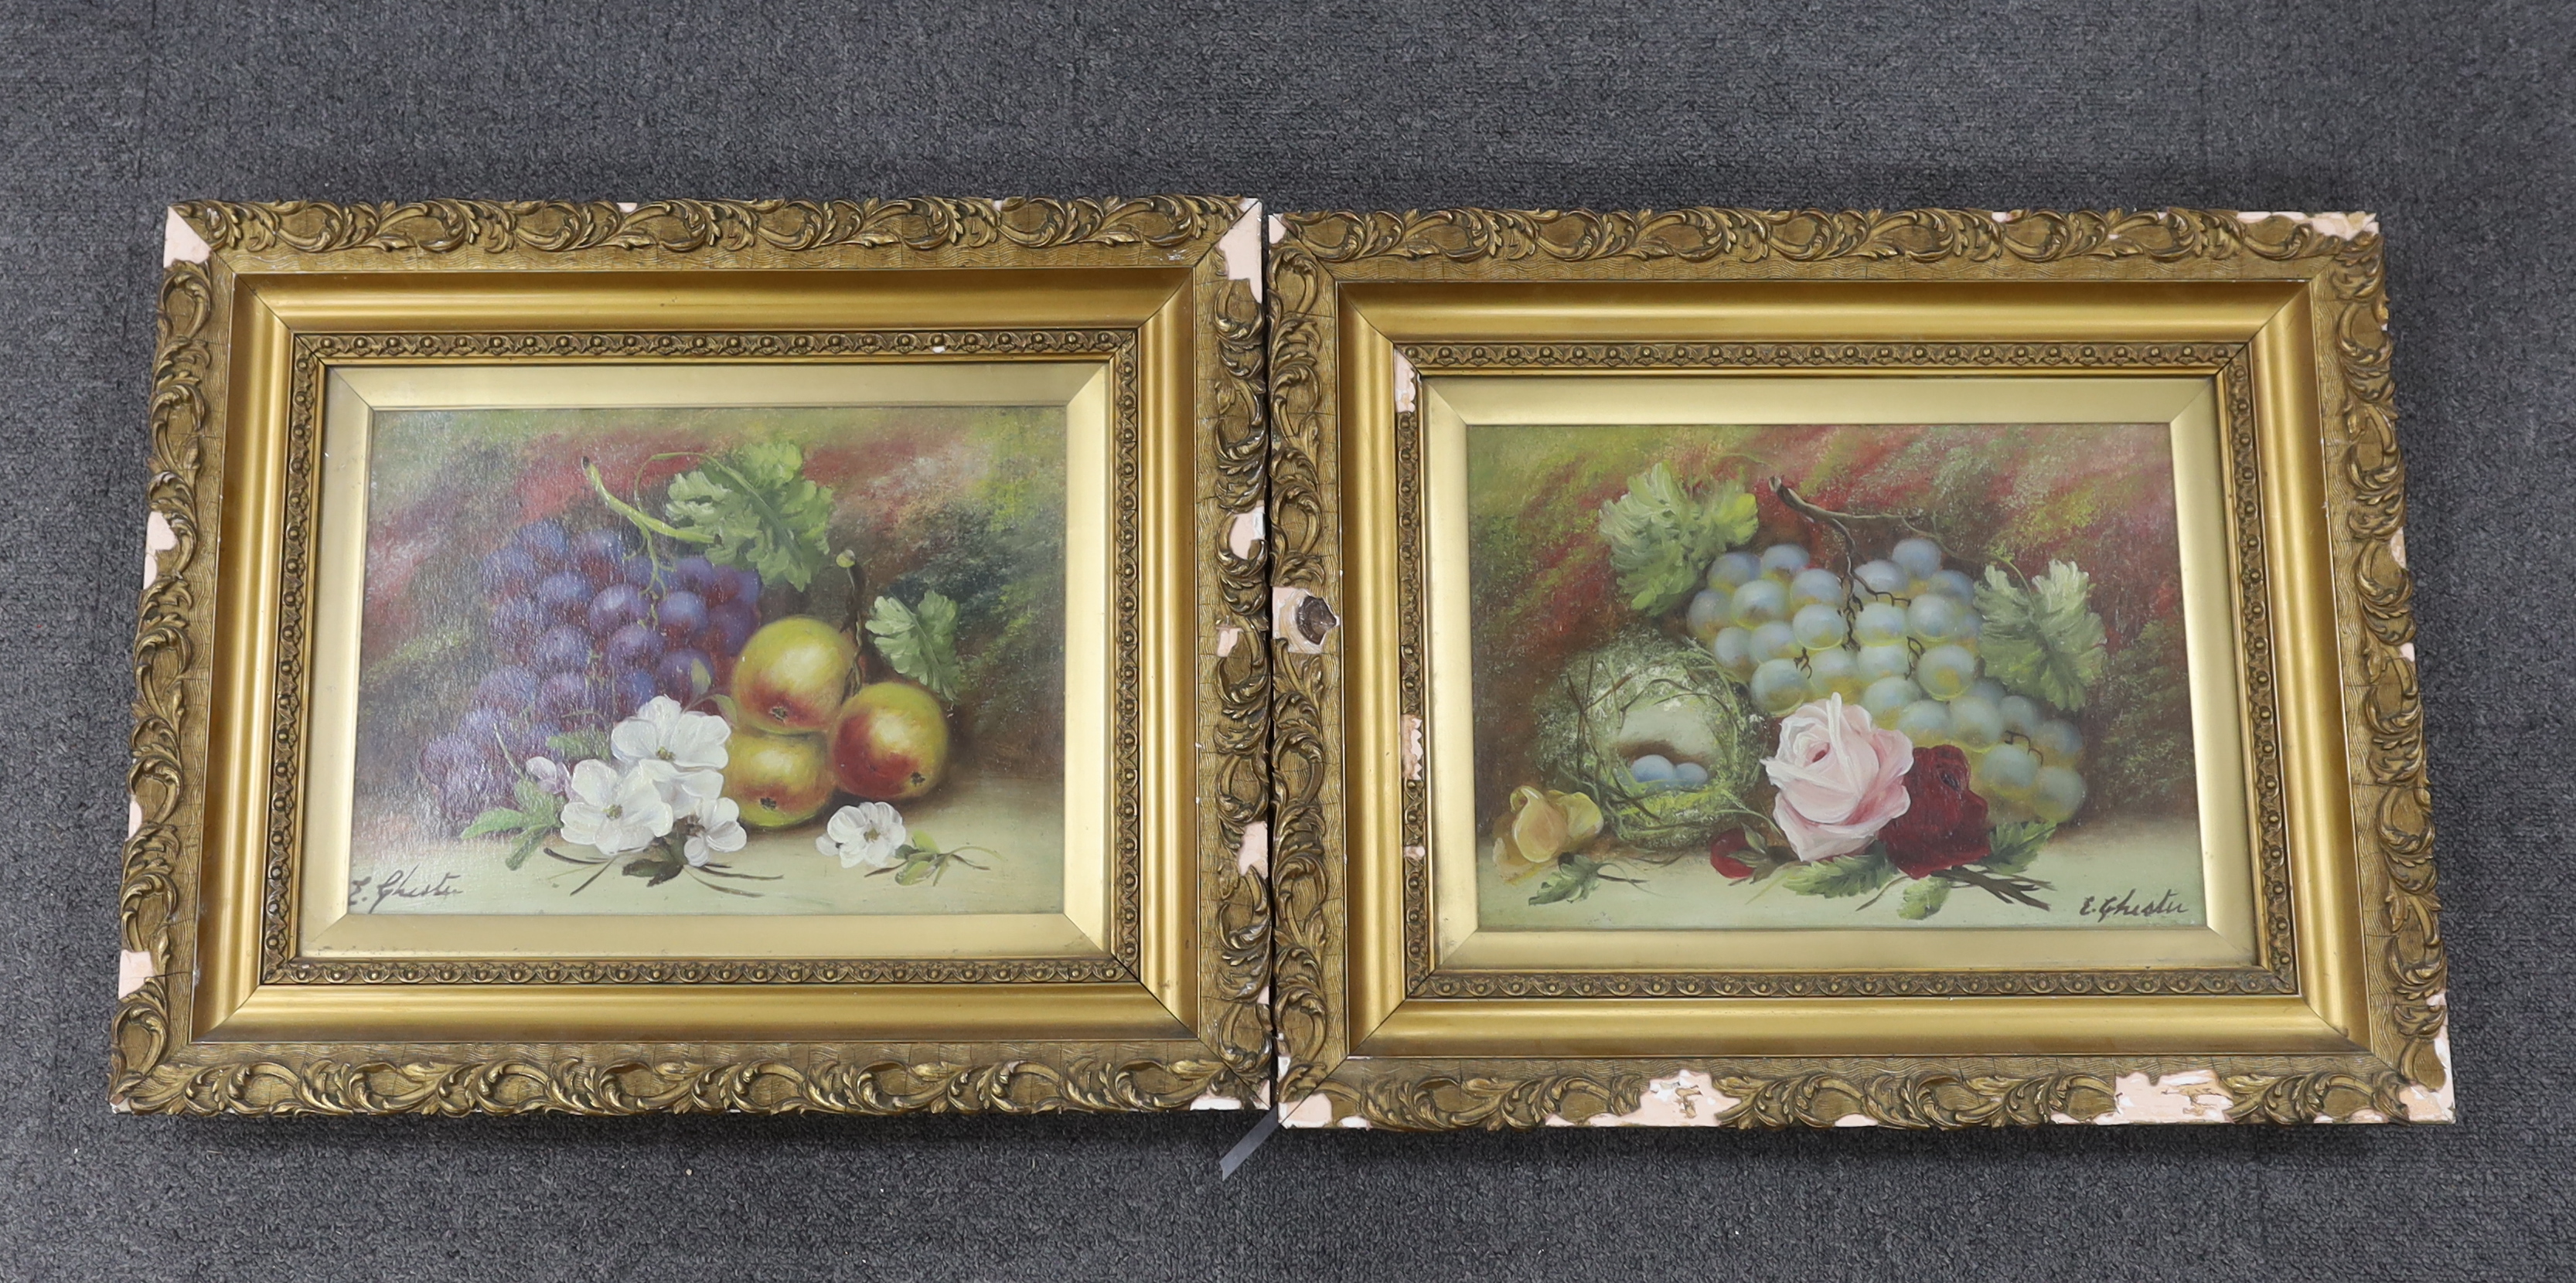 E. Ghist, pair of oils on board, Still lifes of fruit and flowers, each signed, 23 x 32cm